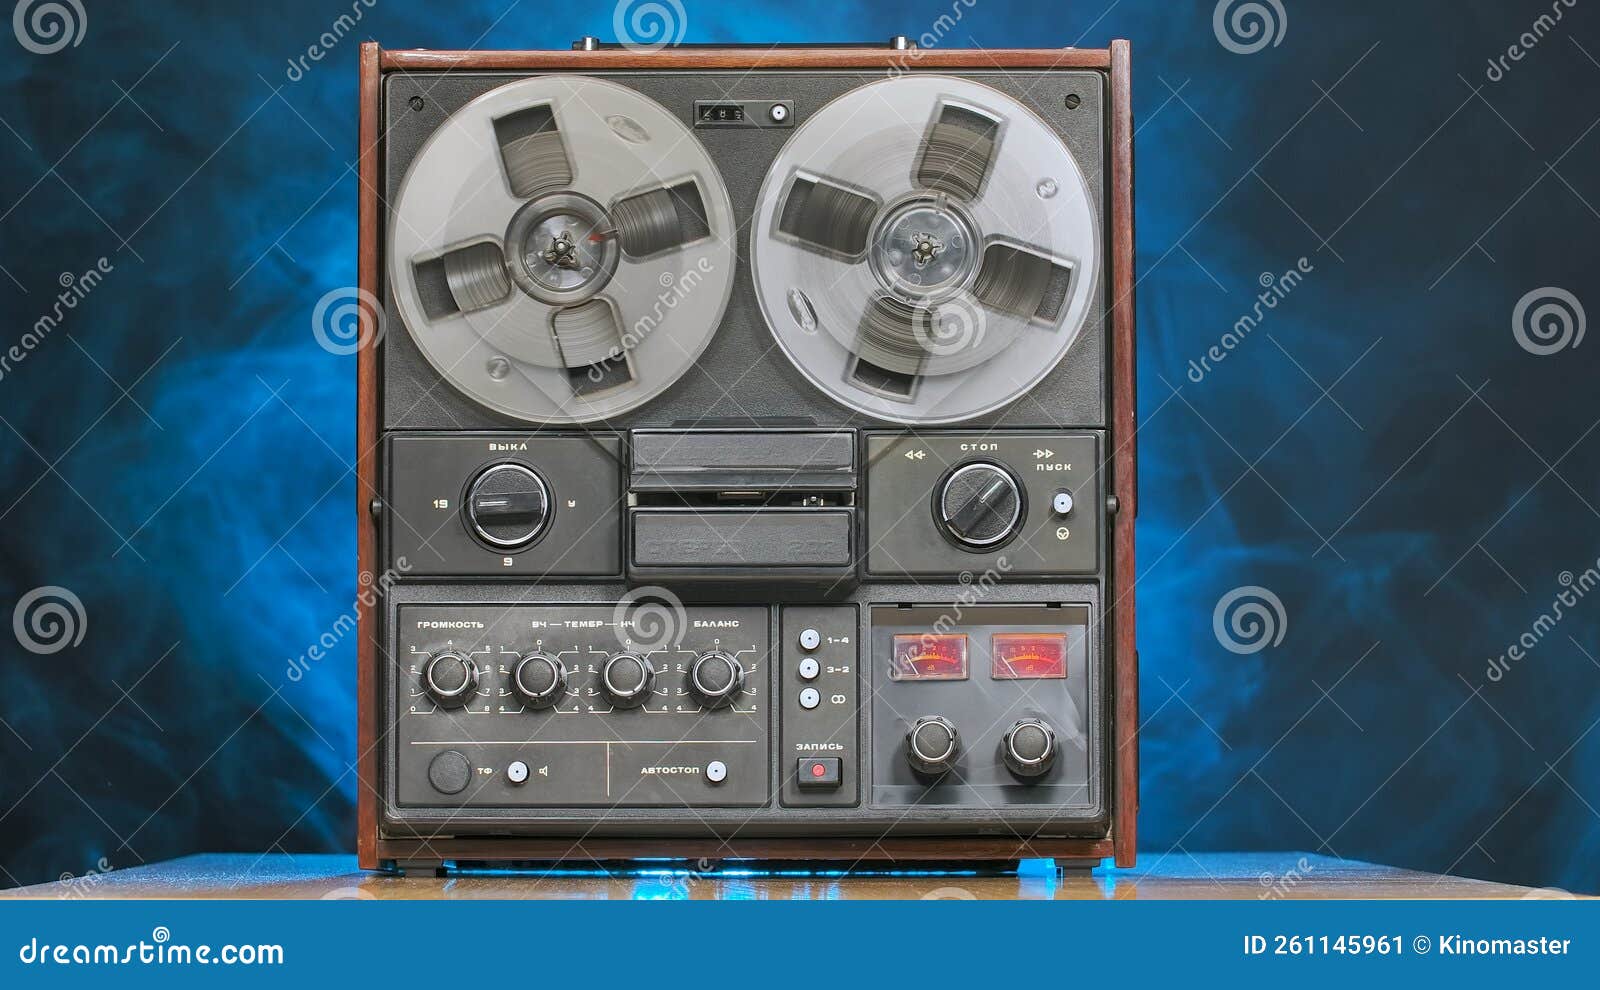 https://thumbs.dreamstime.com/z/retro-reel-to-tape-recorder-studio-background-blue-light-smoke-vintage-music-player-old-plastic-bobbins-buttons-knobs-261145961.jpg